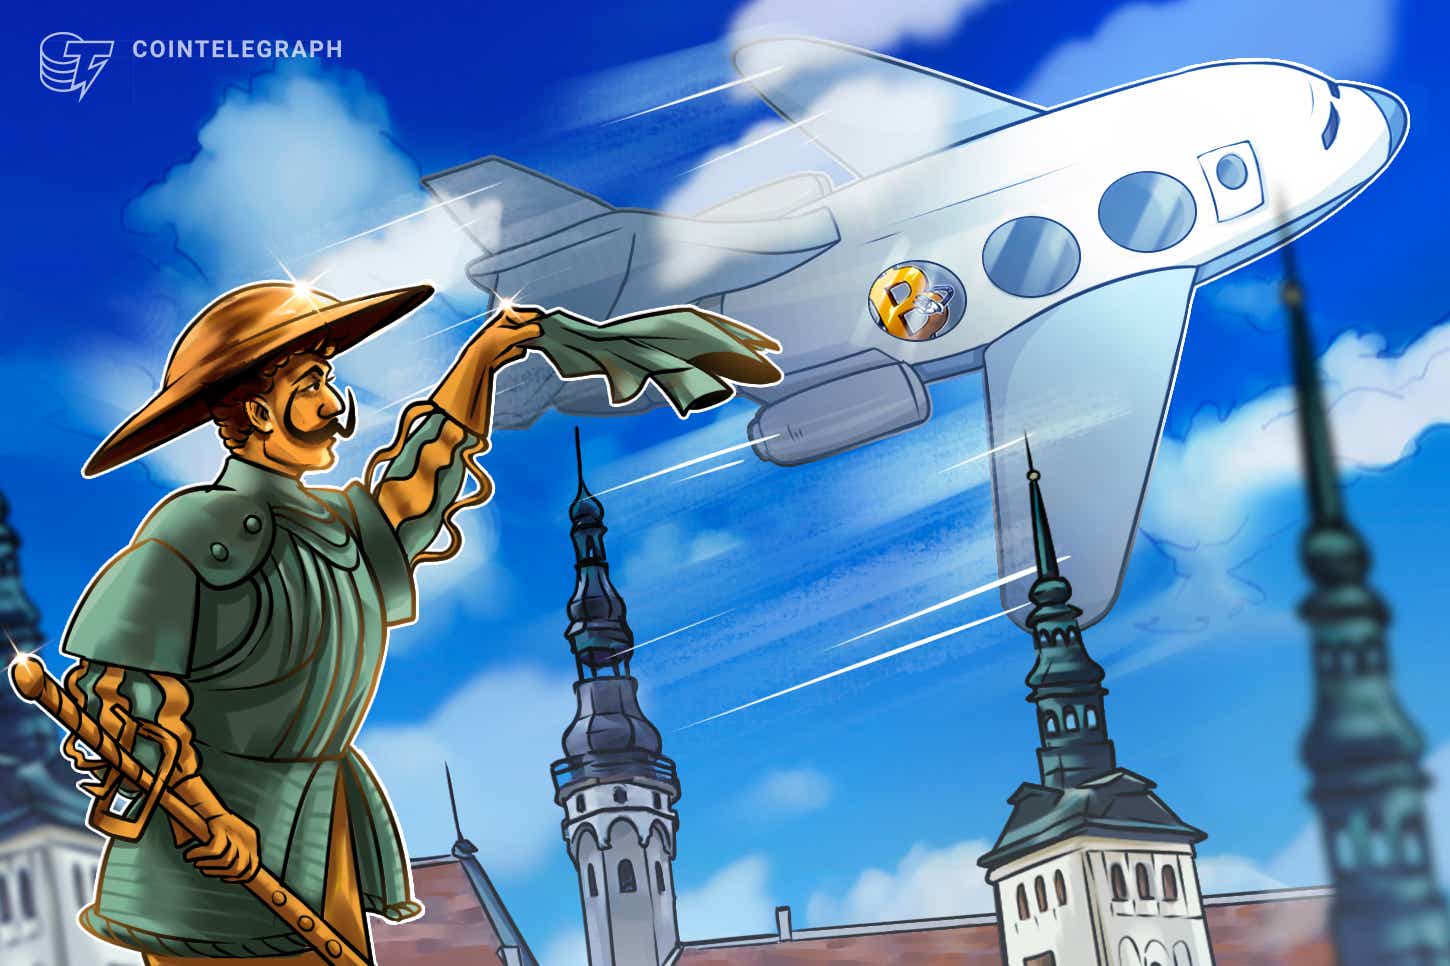 Estonia’s-new-aml-laws-set-to-clamp-down-on-crypto-industry